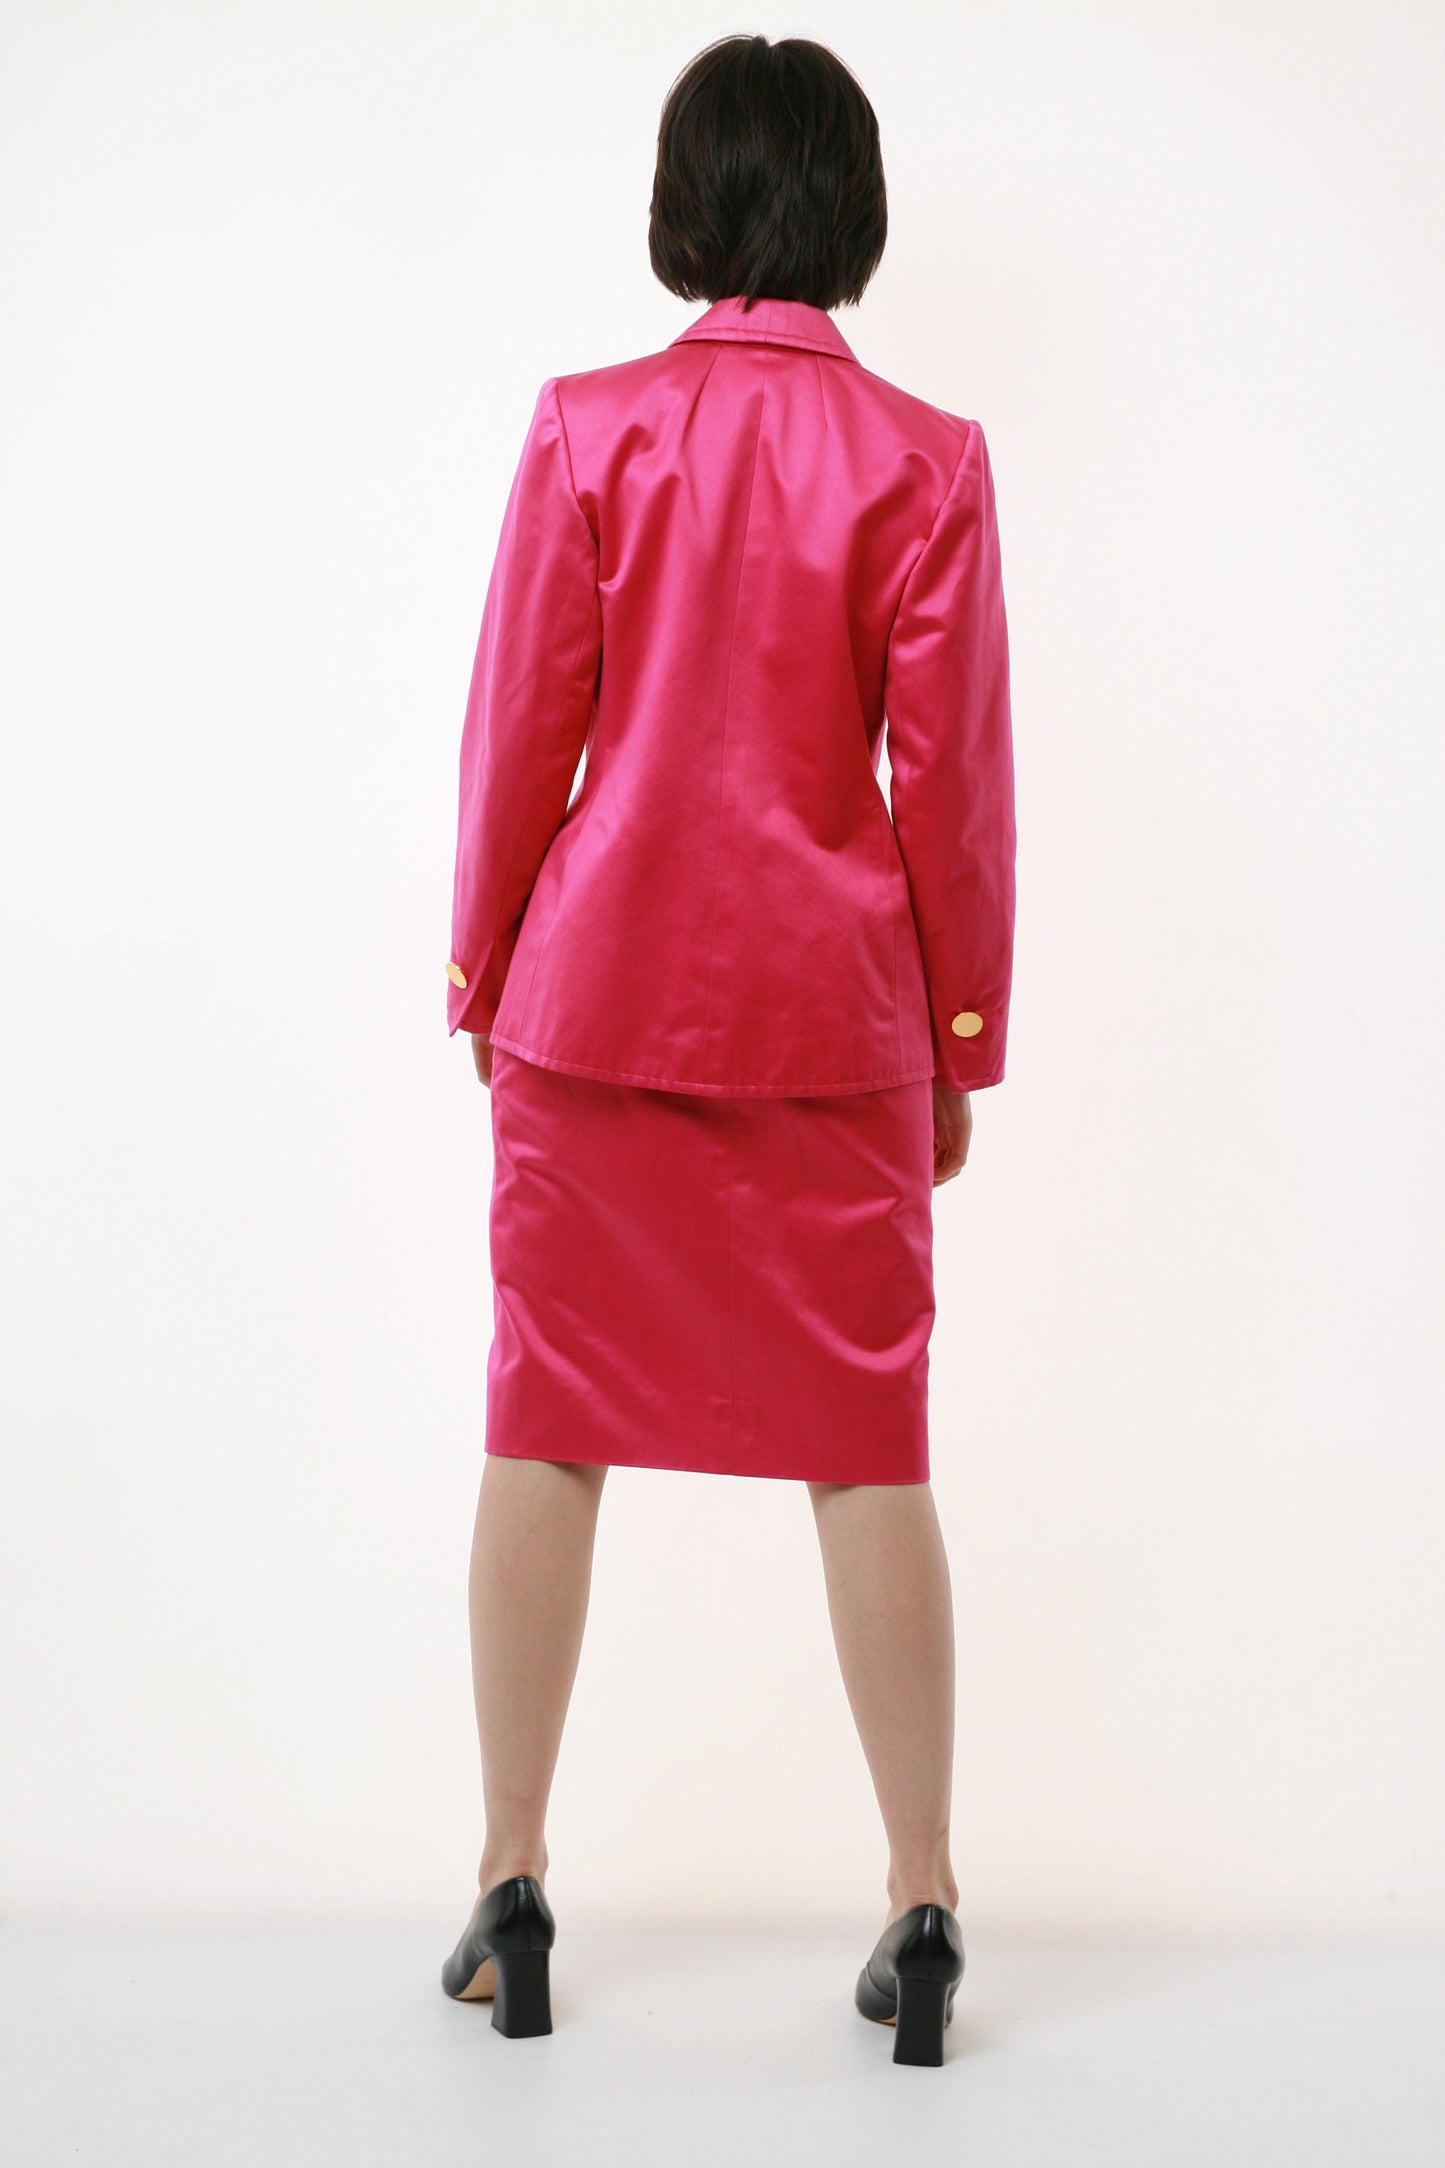 70s Vintage YSL Yves Saint Laurent Rive Gauche Summer Bright Pink Fuchsia High Waisted Pencil and Blazer All in One Suit 2815